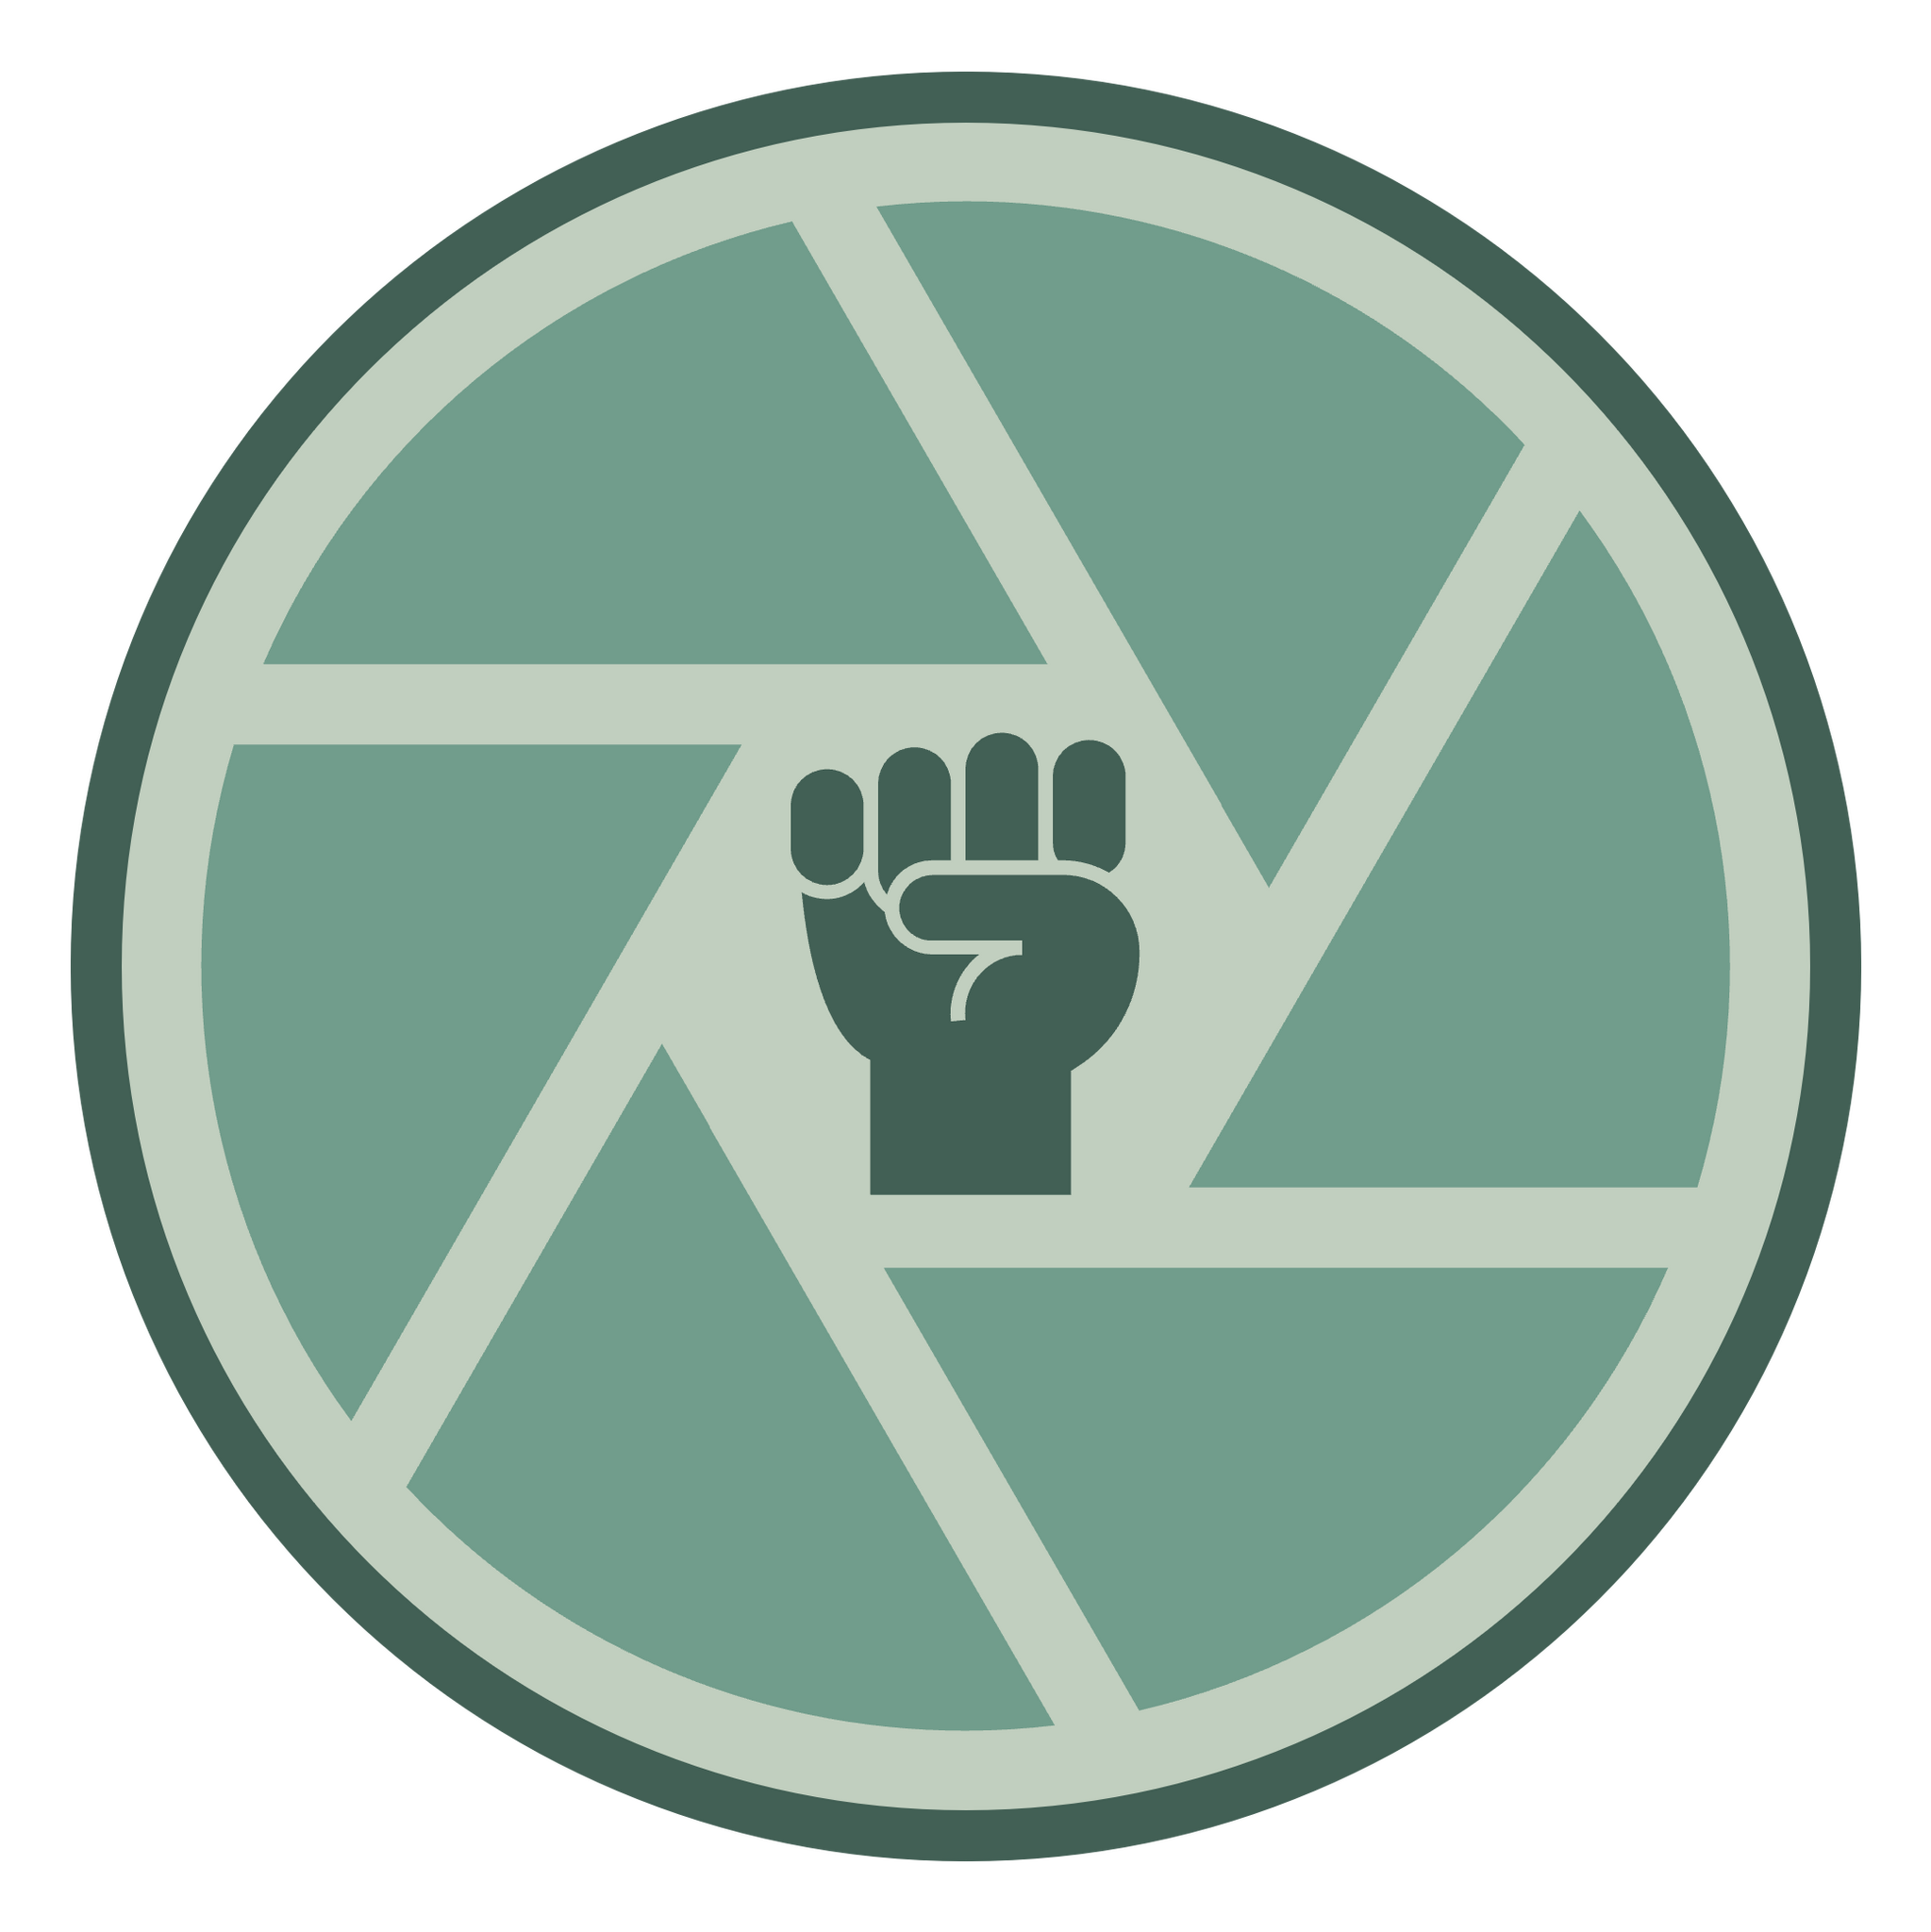 Anti-Racism badge: a dark green fist on a light green background